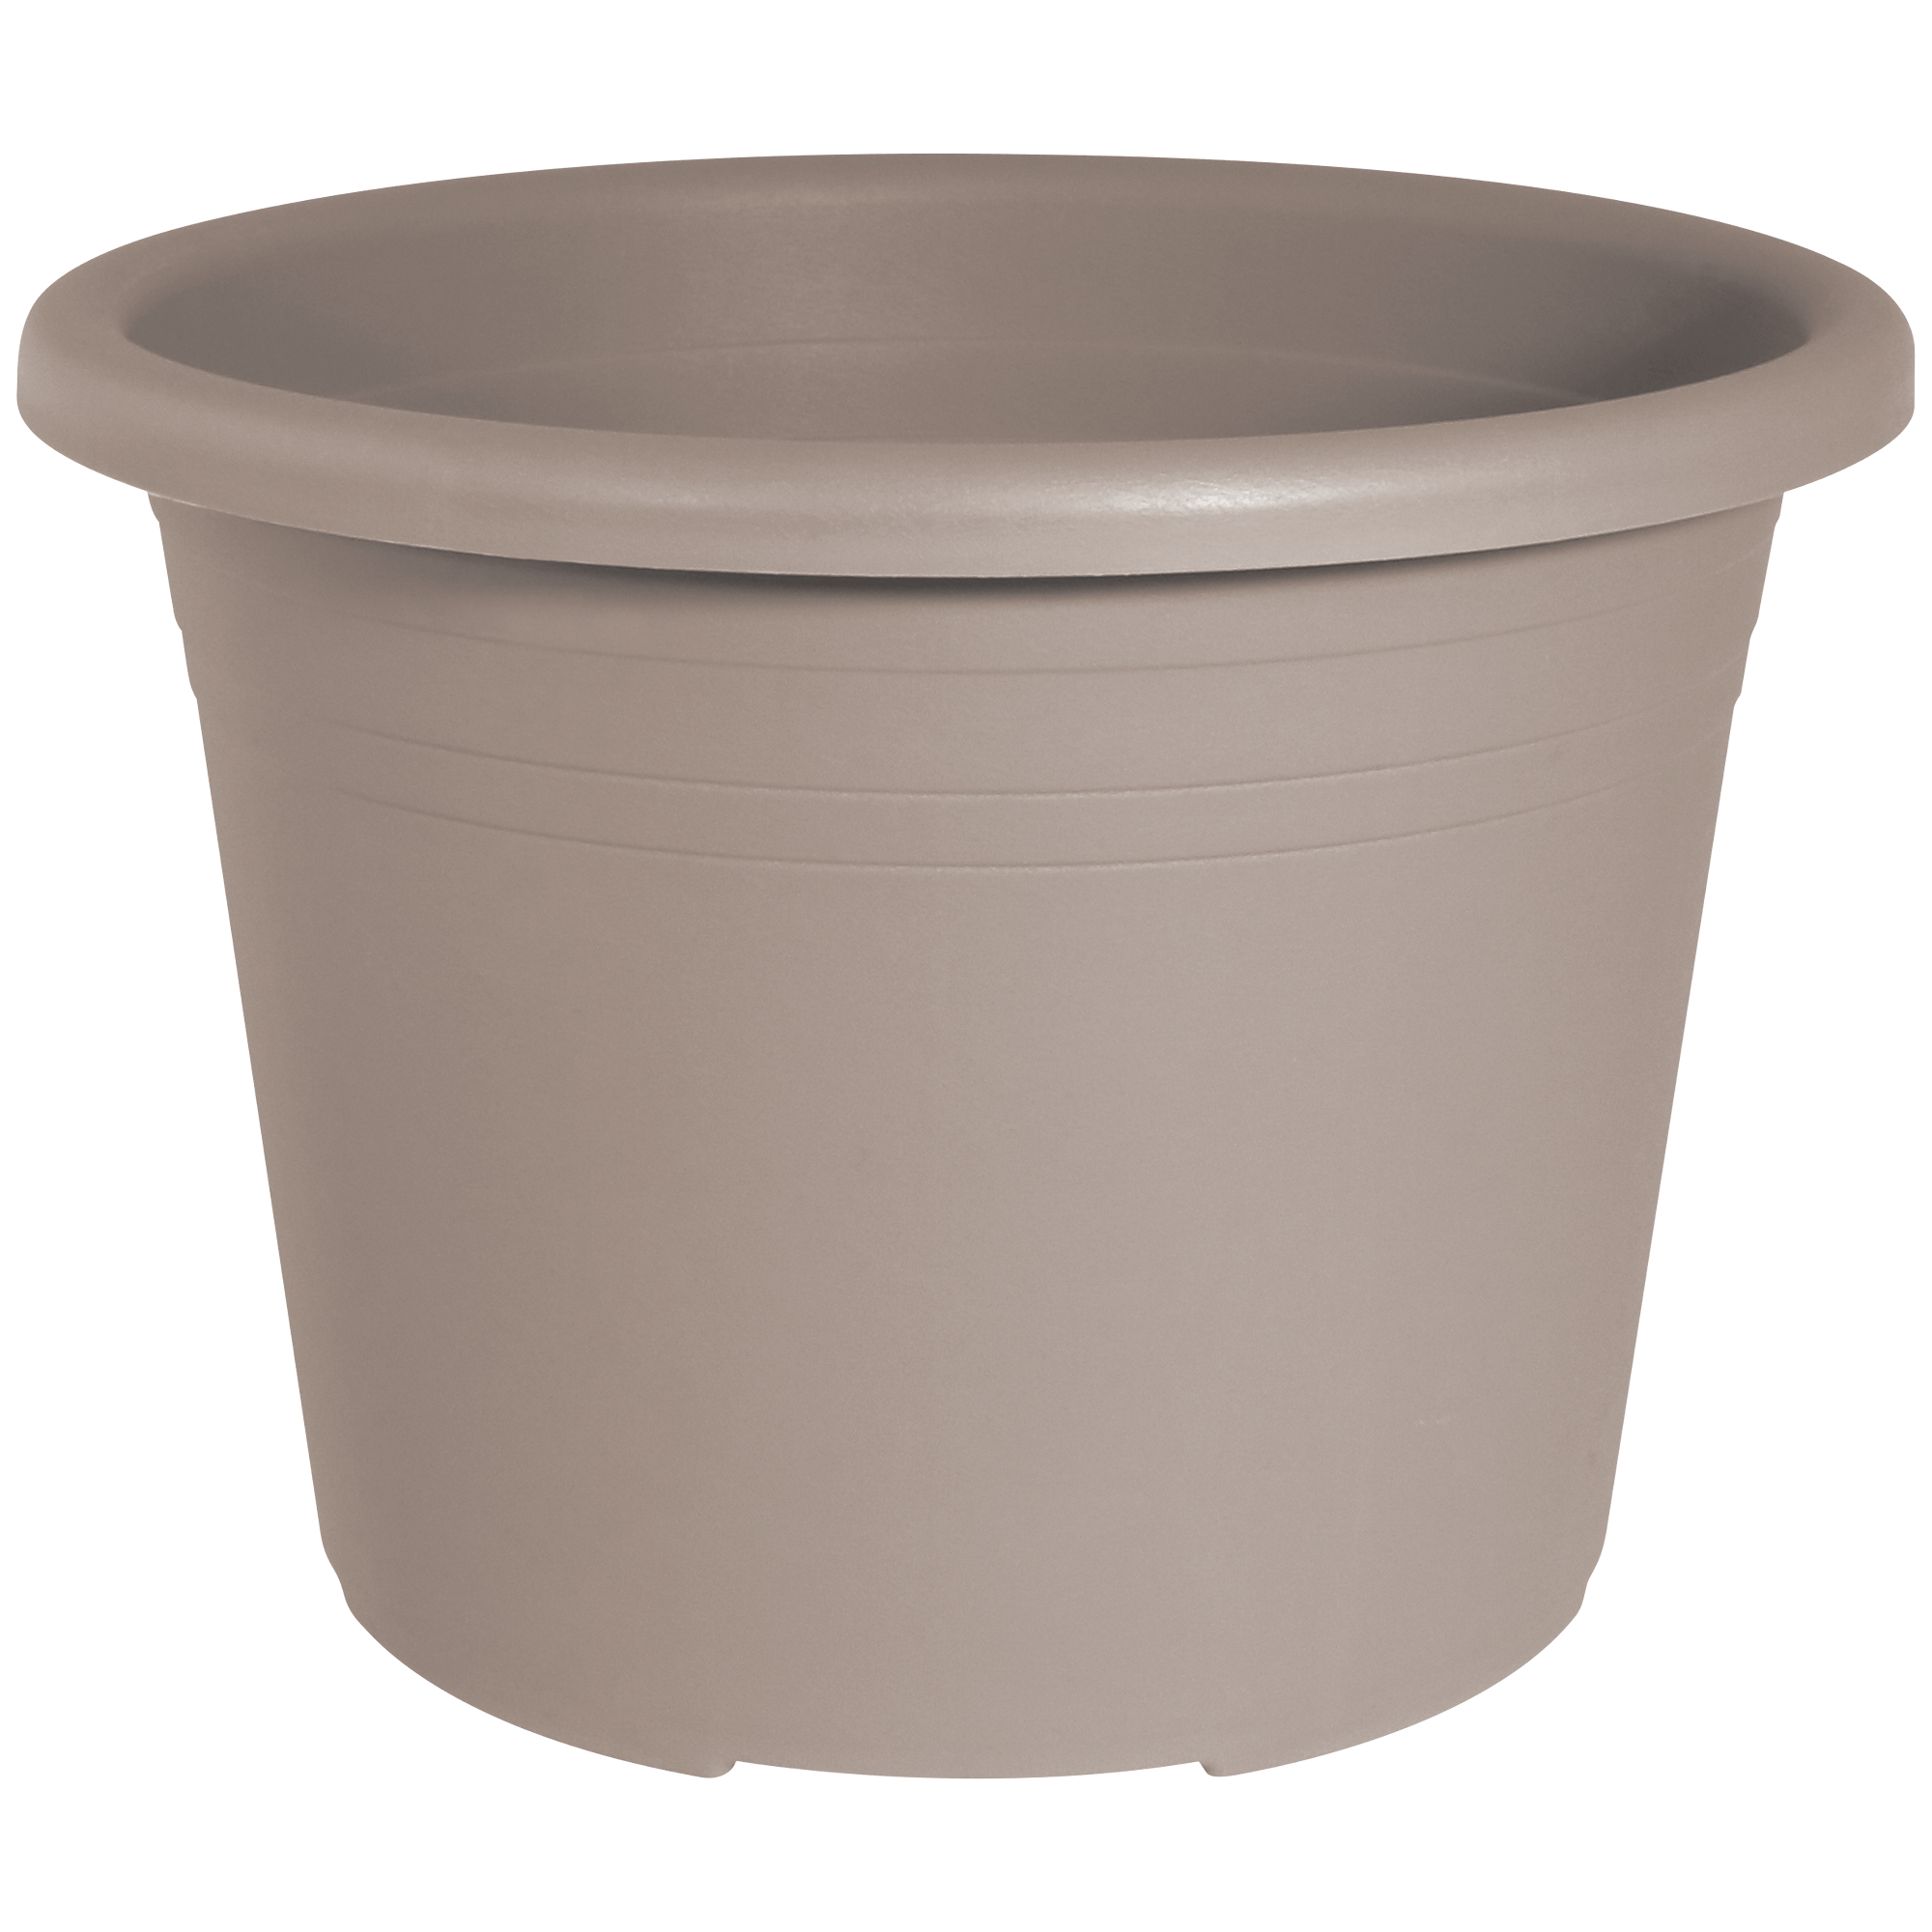 Topf 'Cylindro' taupe Ø 40 cm, 21,5 Liter + product picture